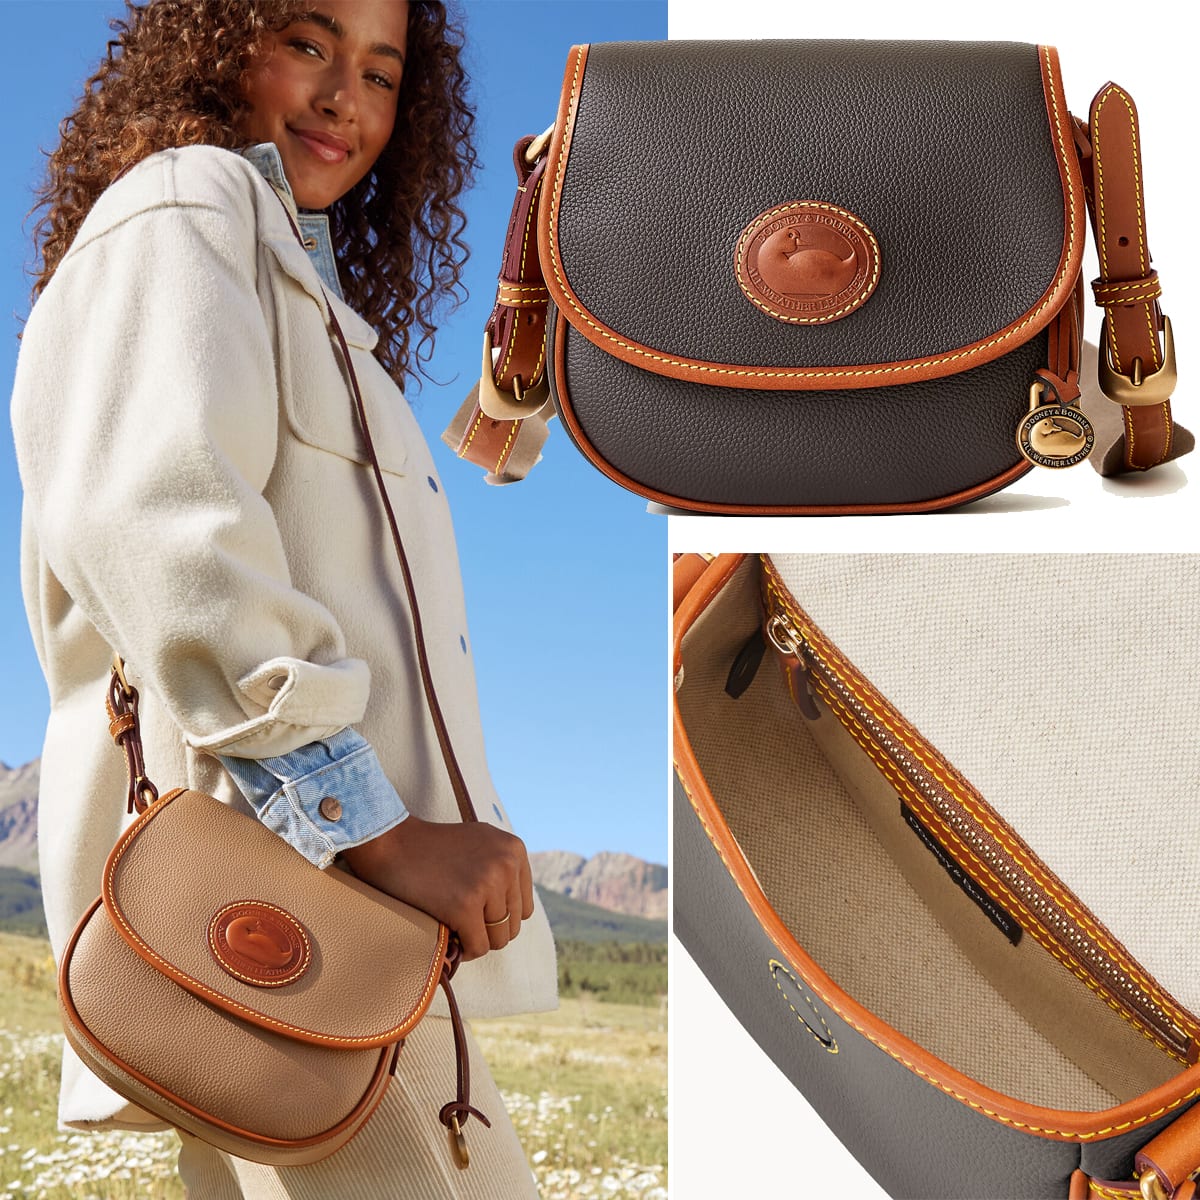 Inspired by equestrian design, the All Weather Leather 3.0 Saddle Crossbody is made from innovative Italian pebble leather that's lightweight and long-lasting